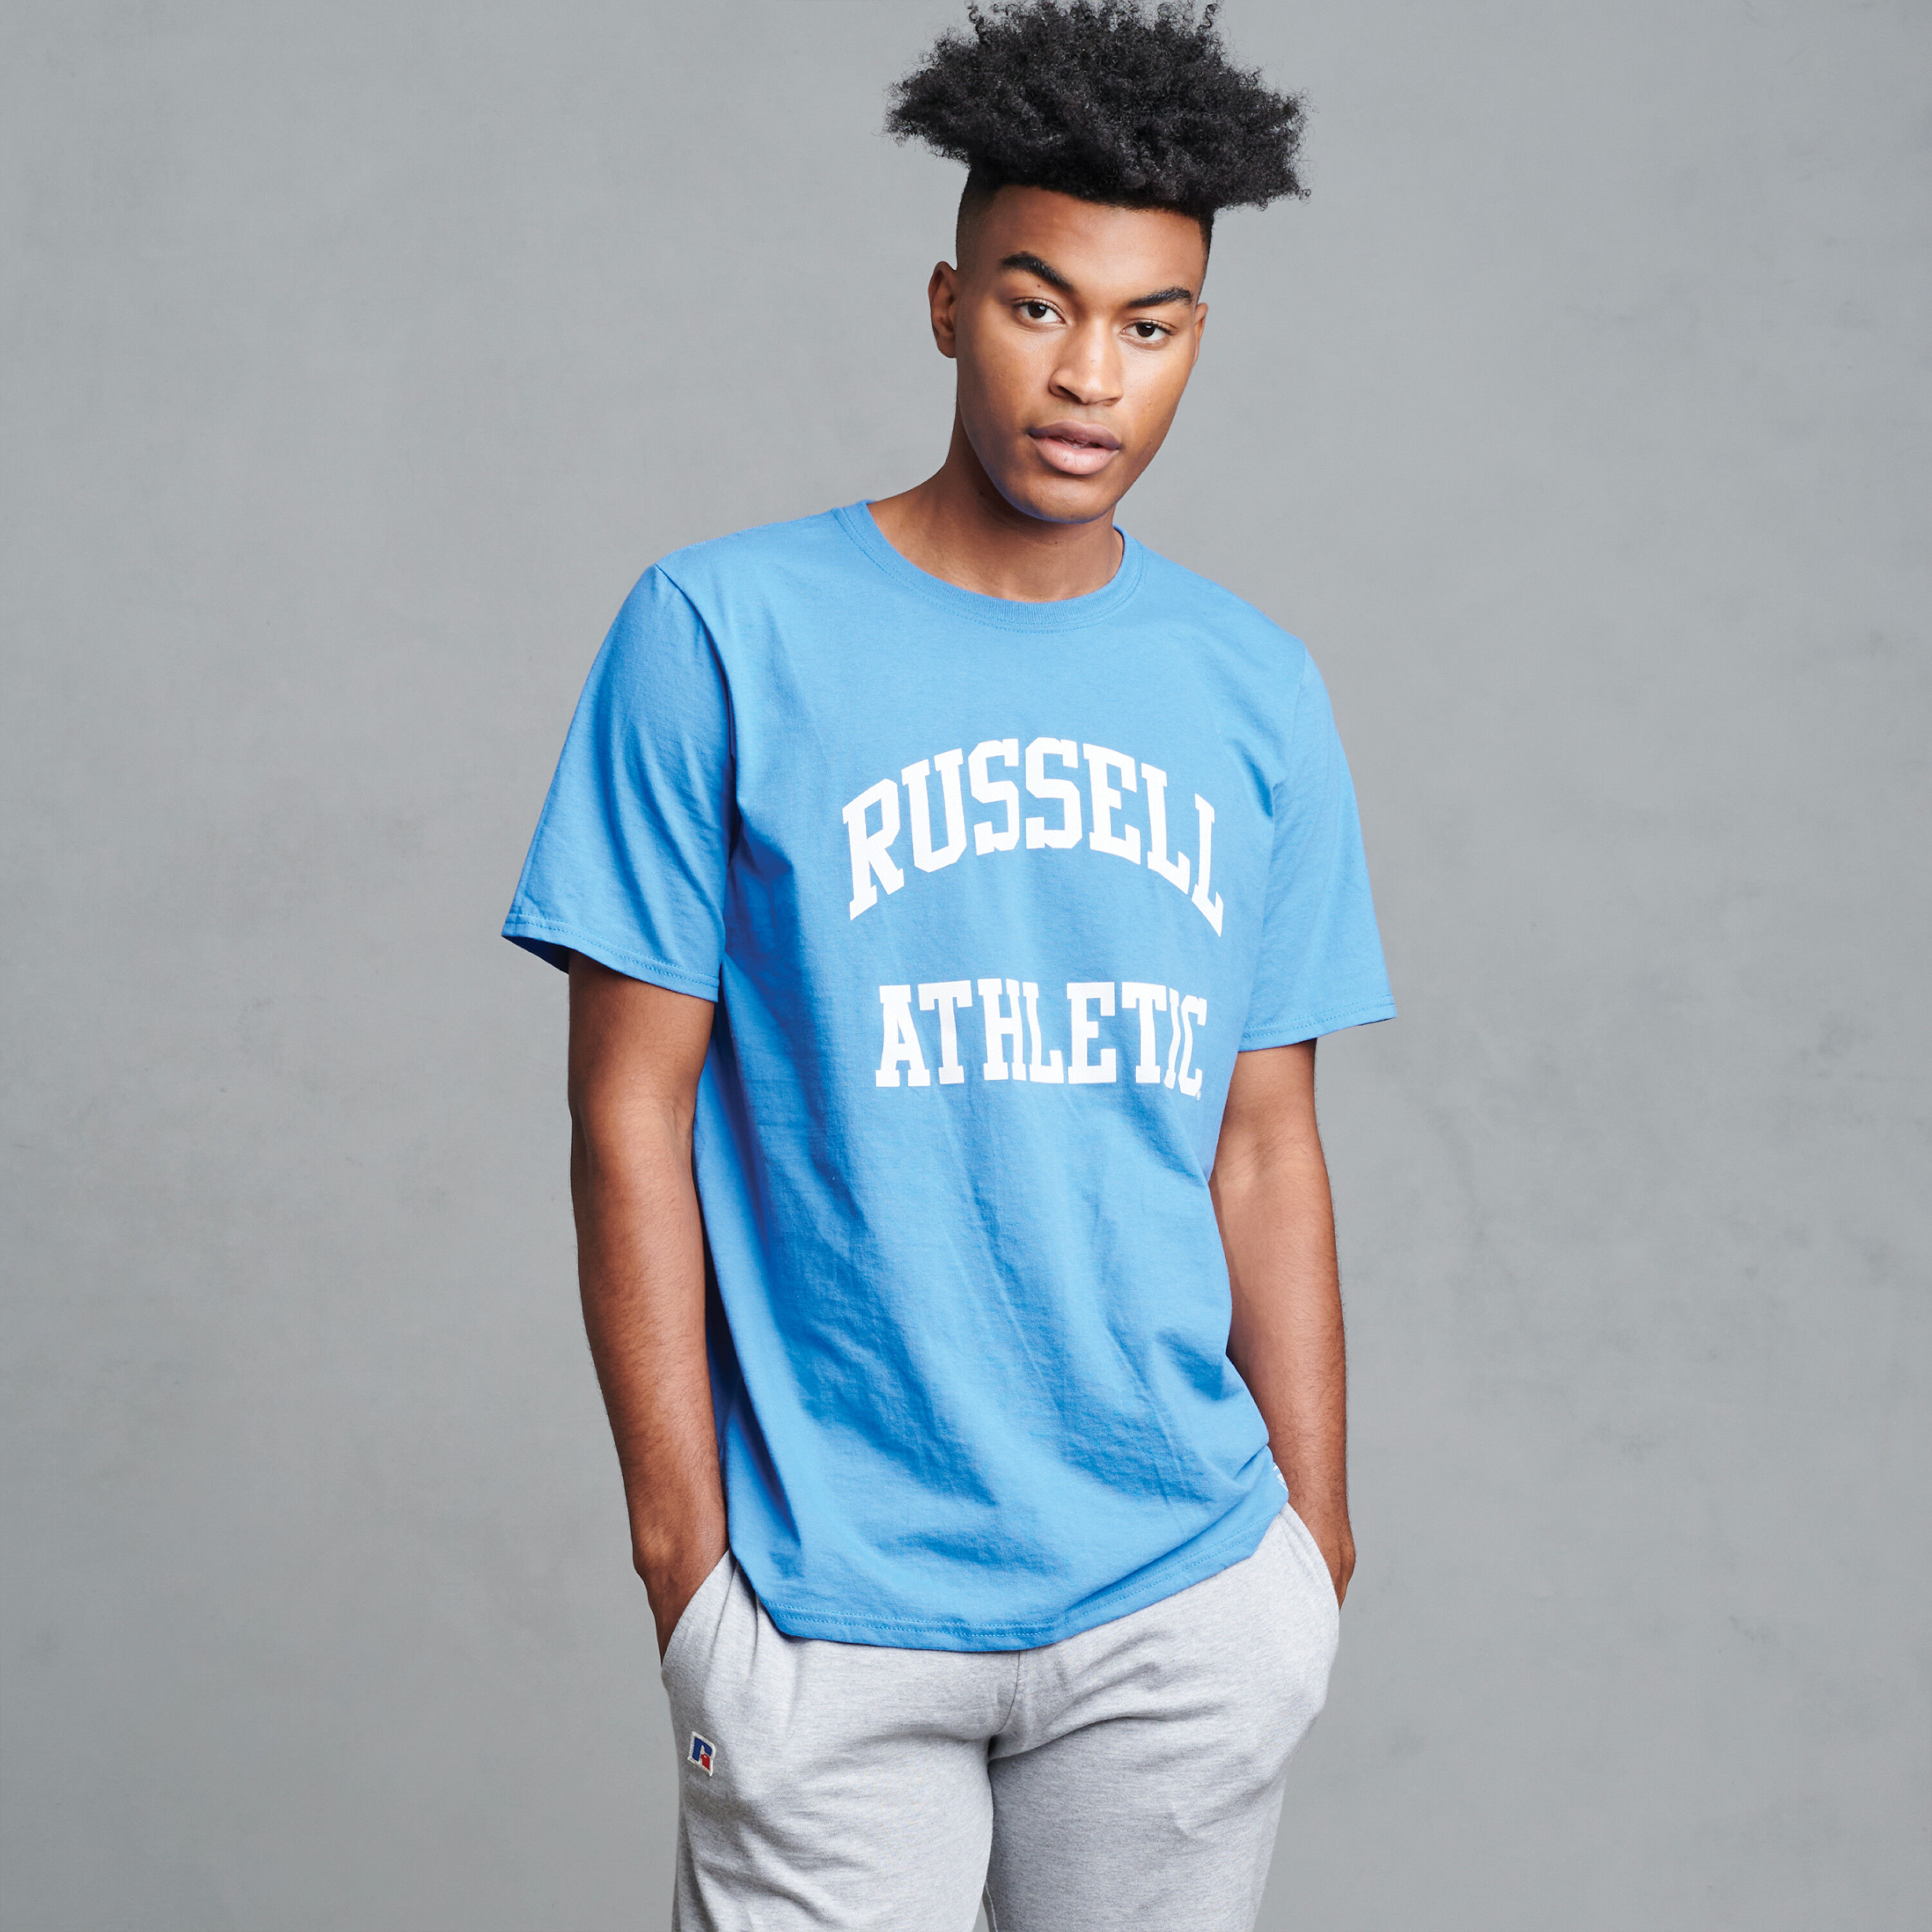 Men's Athletic T Shirts & Graphic Tees | Russell Athletic